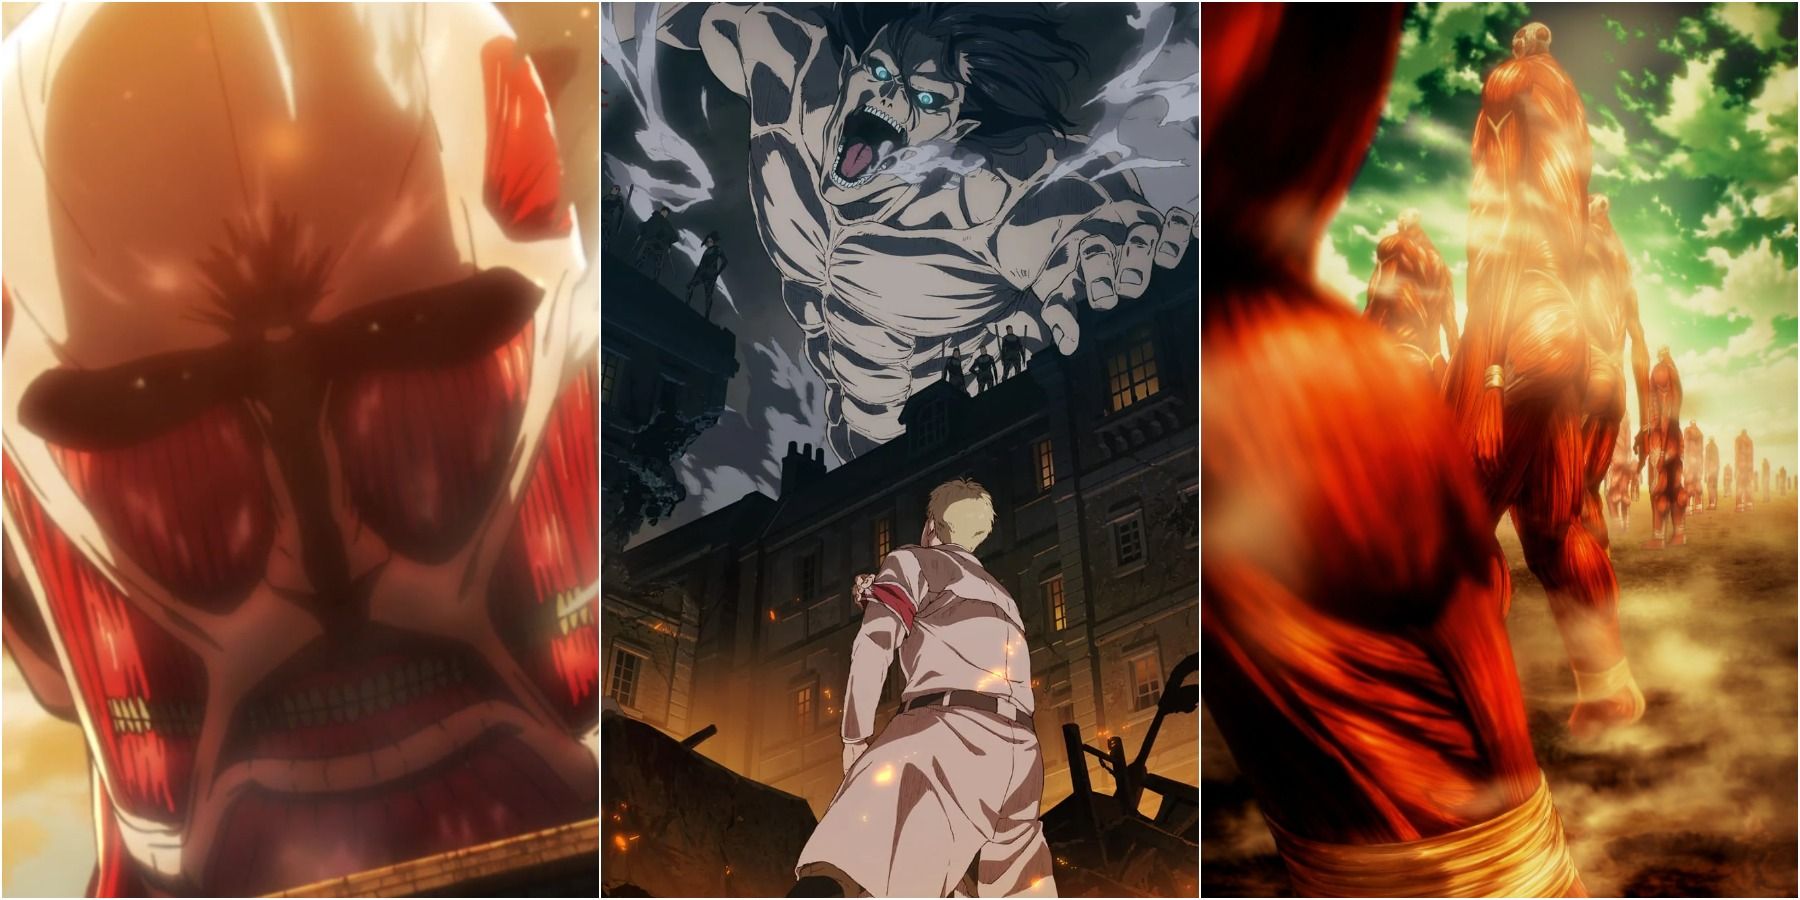 Attack on Titan: Is There Any Hope For a Peaceful Ending?